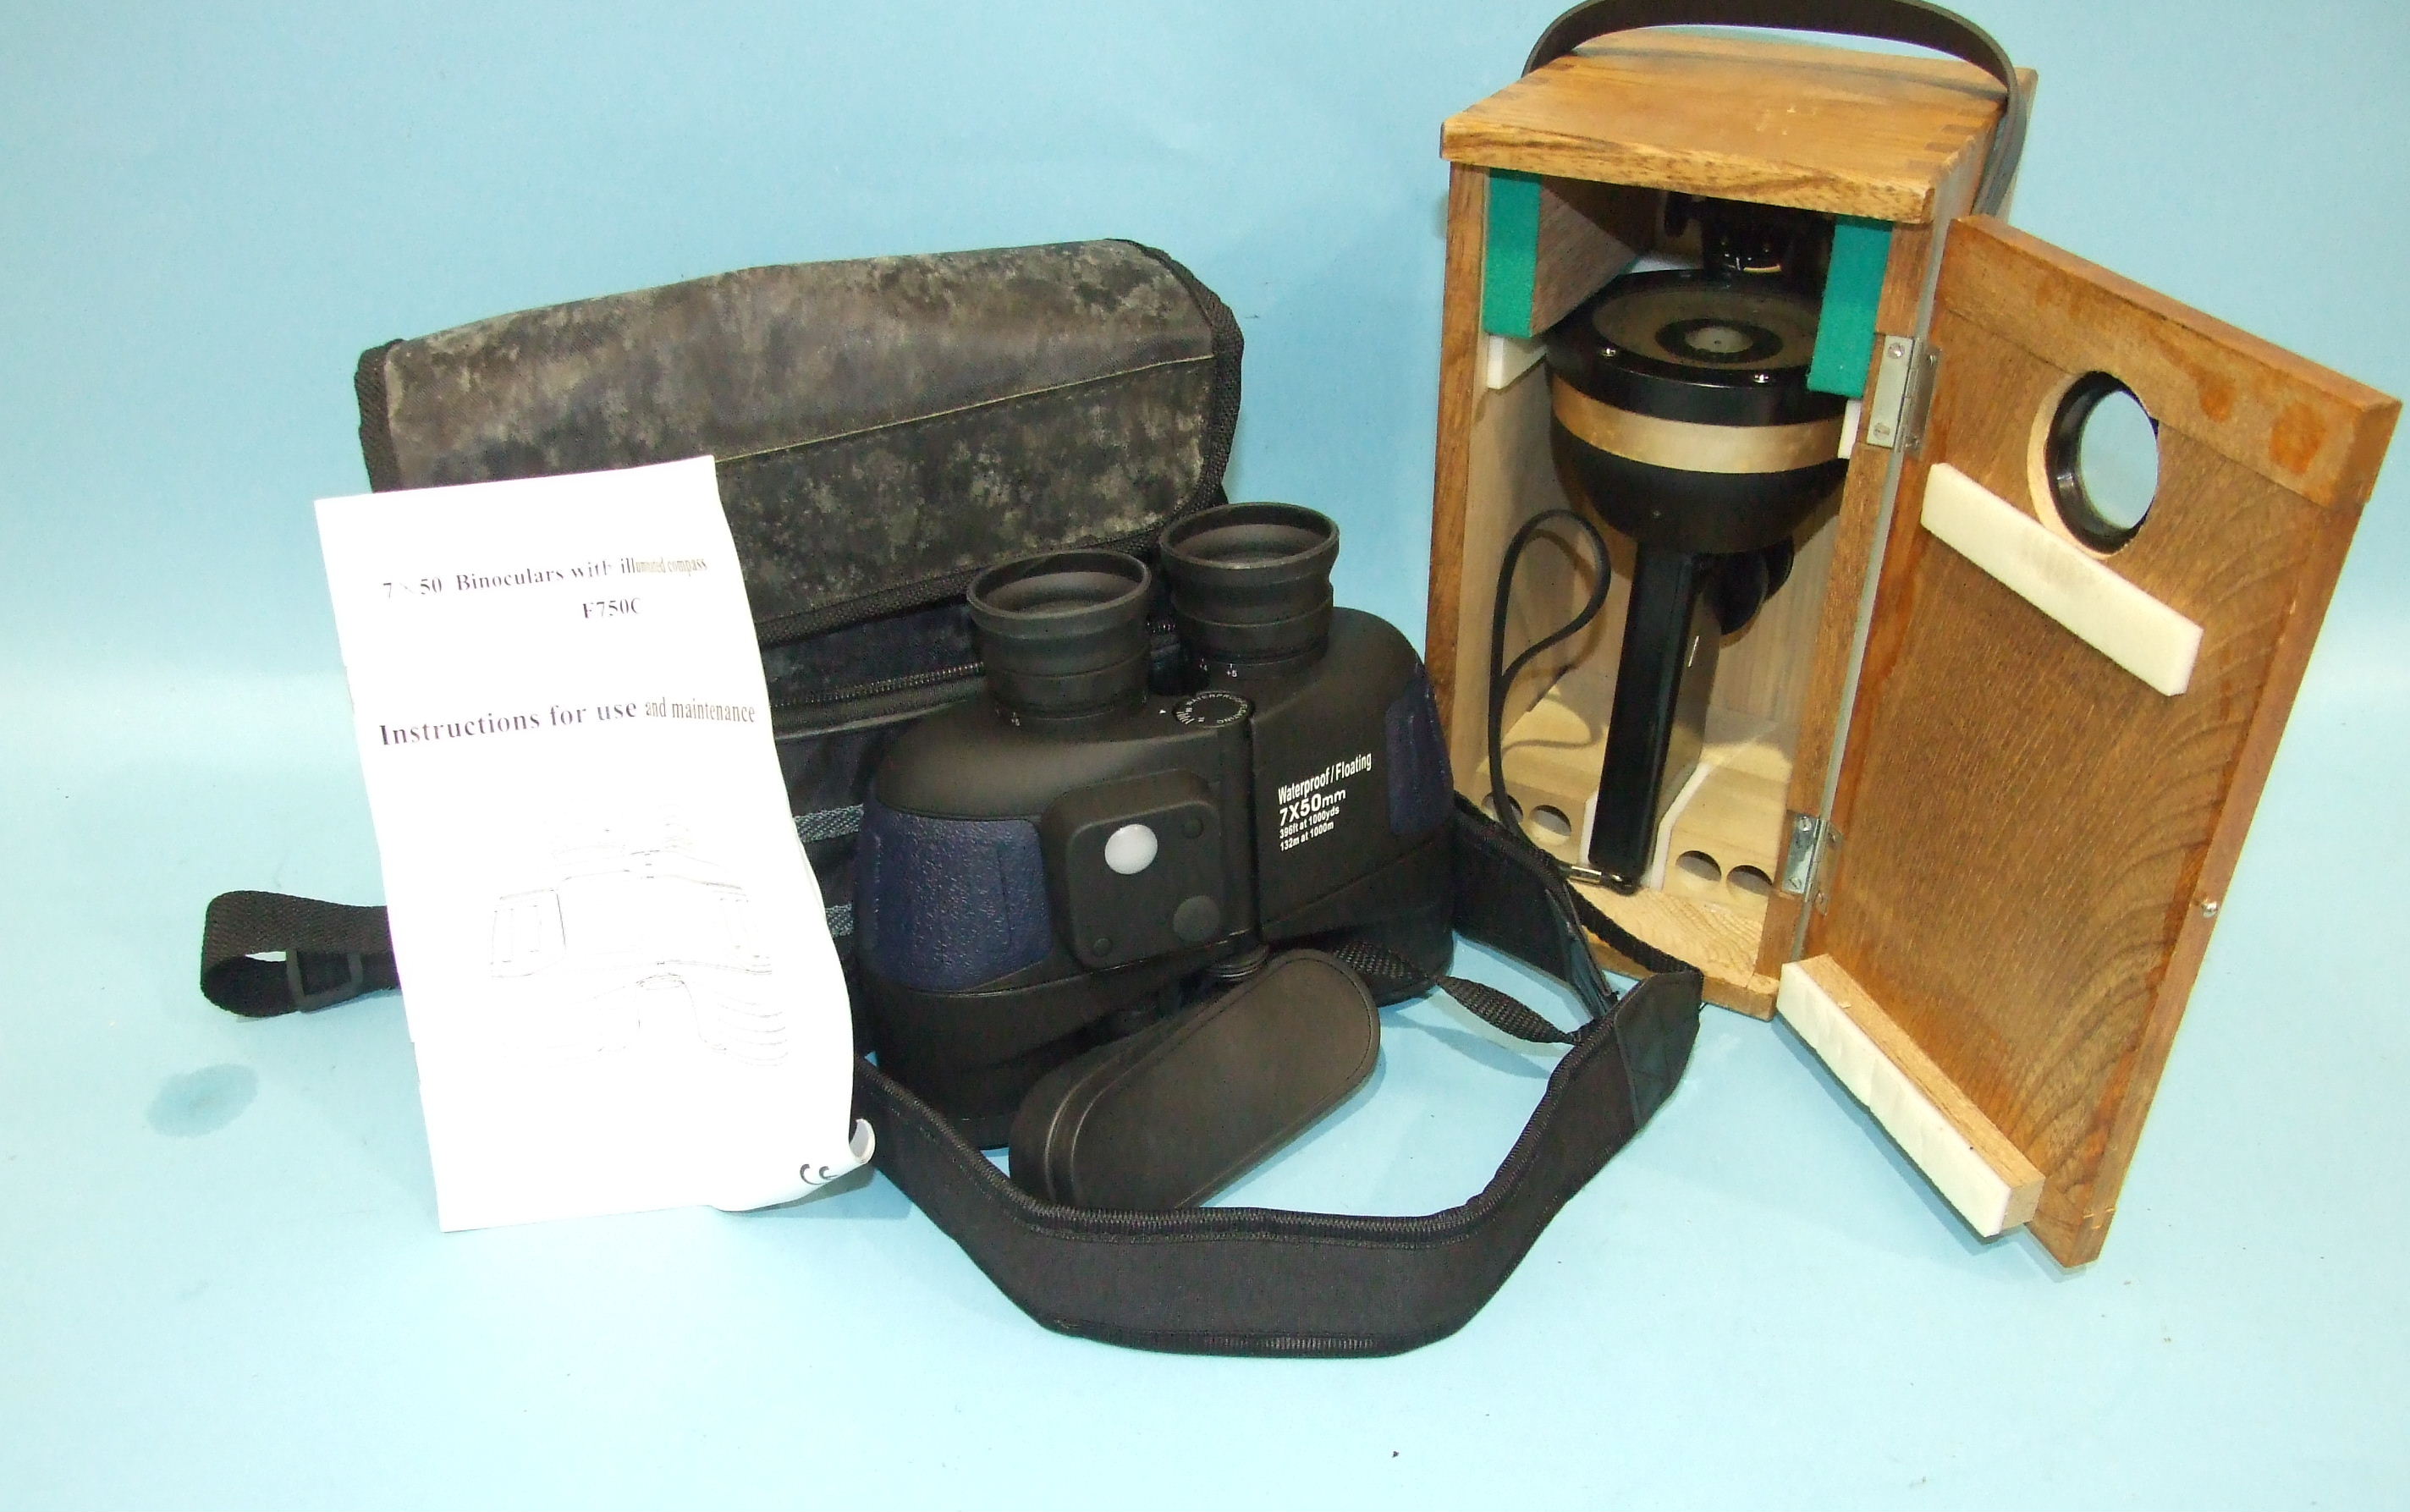 A pair of Bak 4 waterproof/floating 7x50 binoculars with illuminated compass, in case with